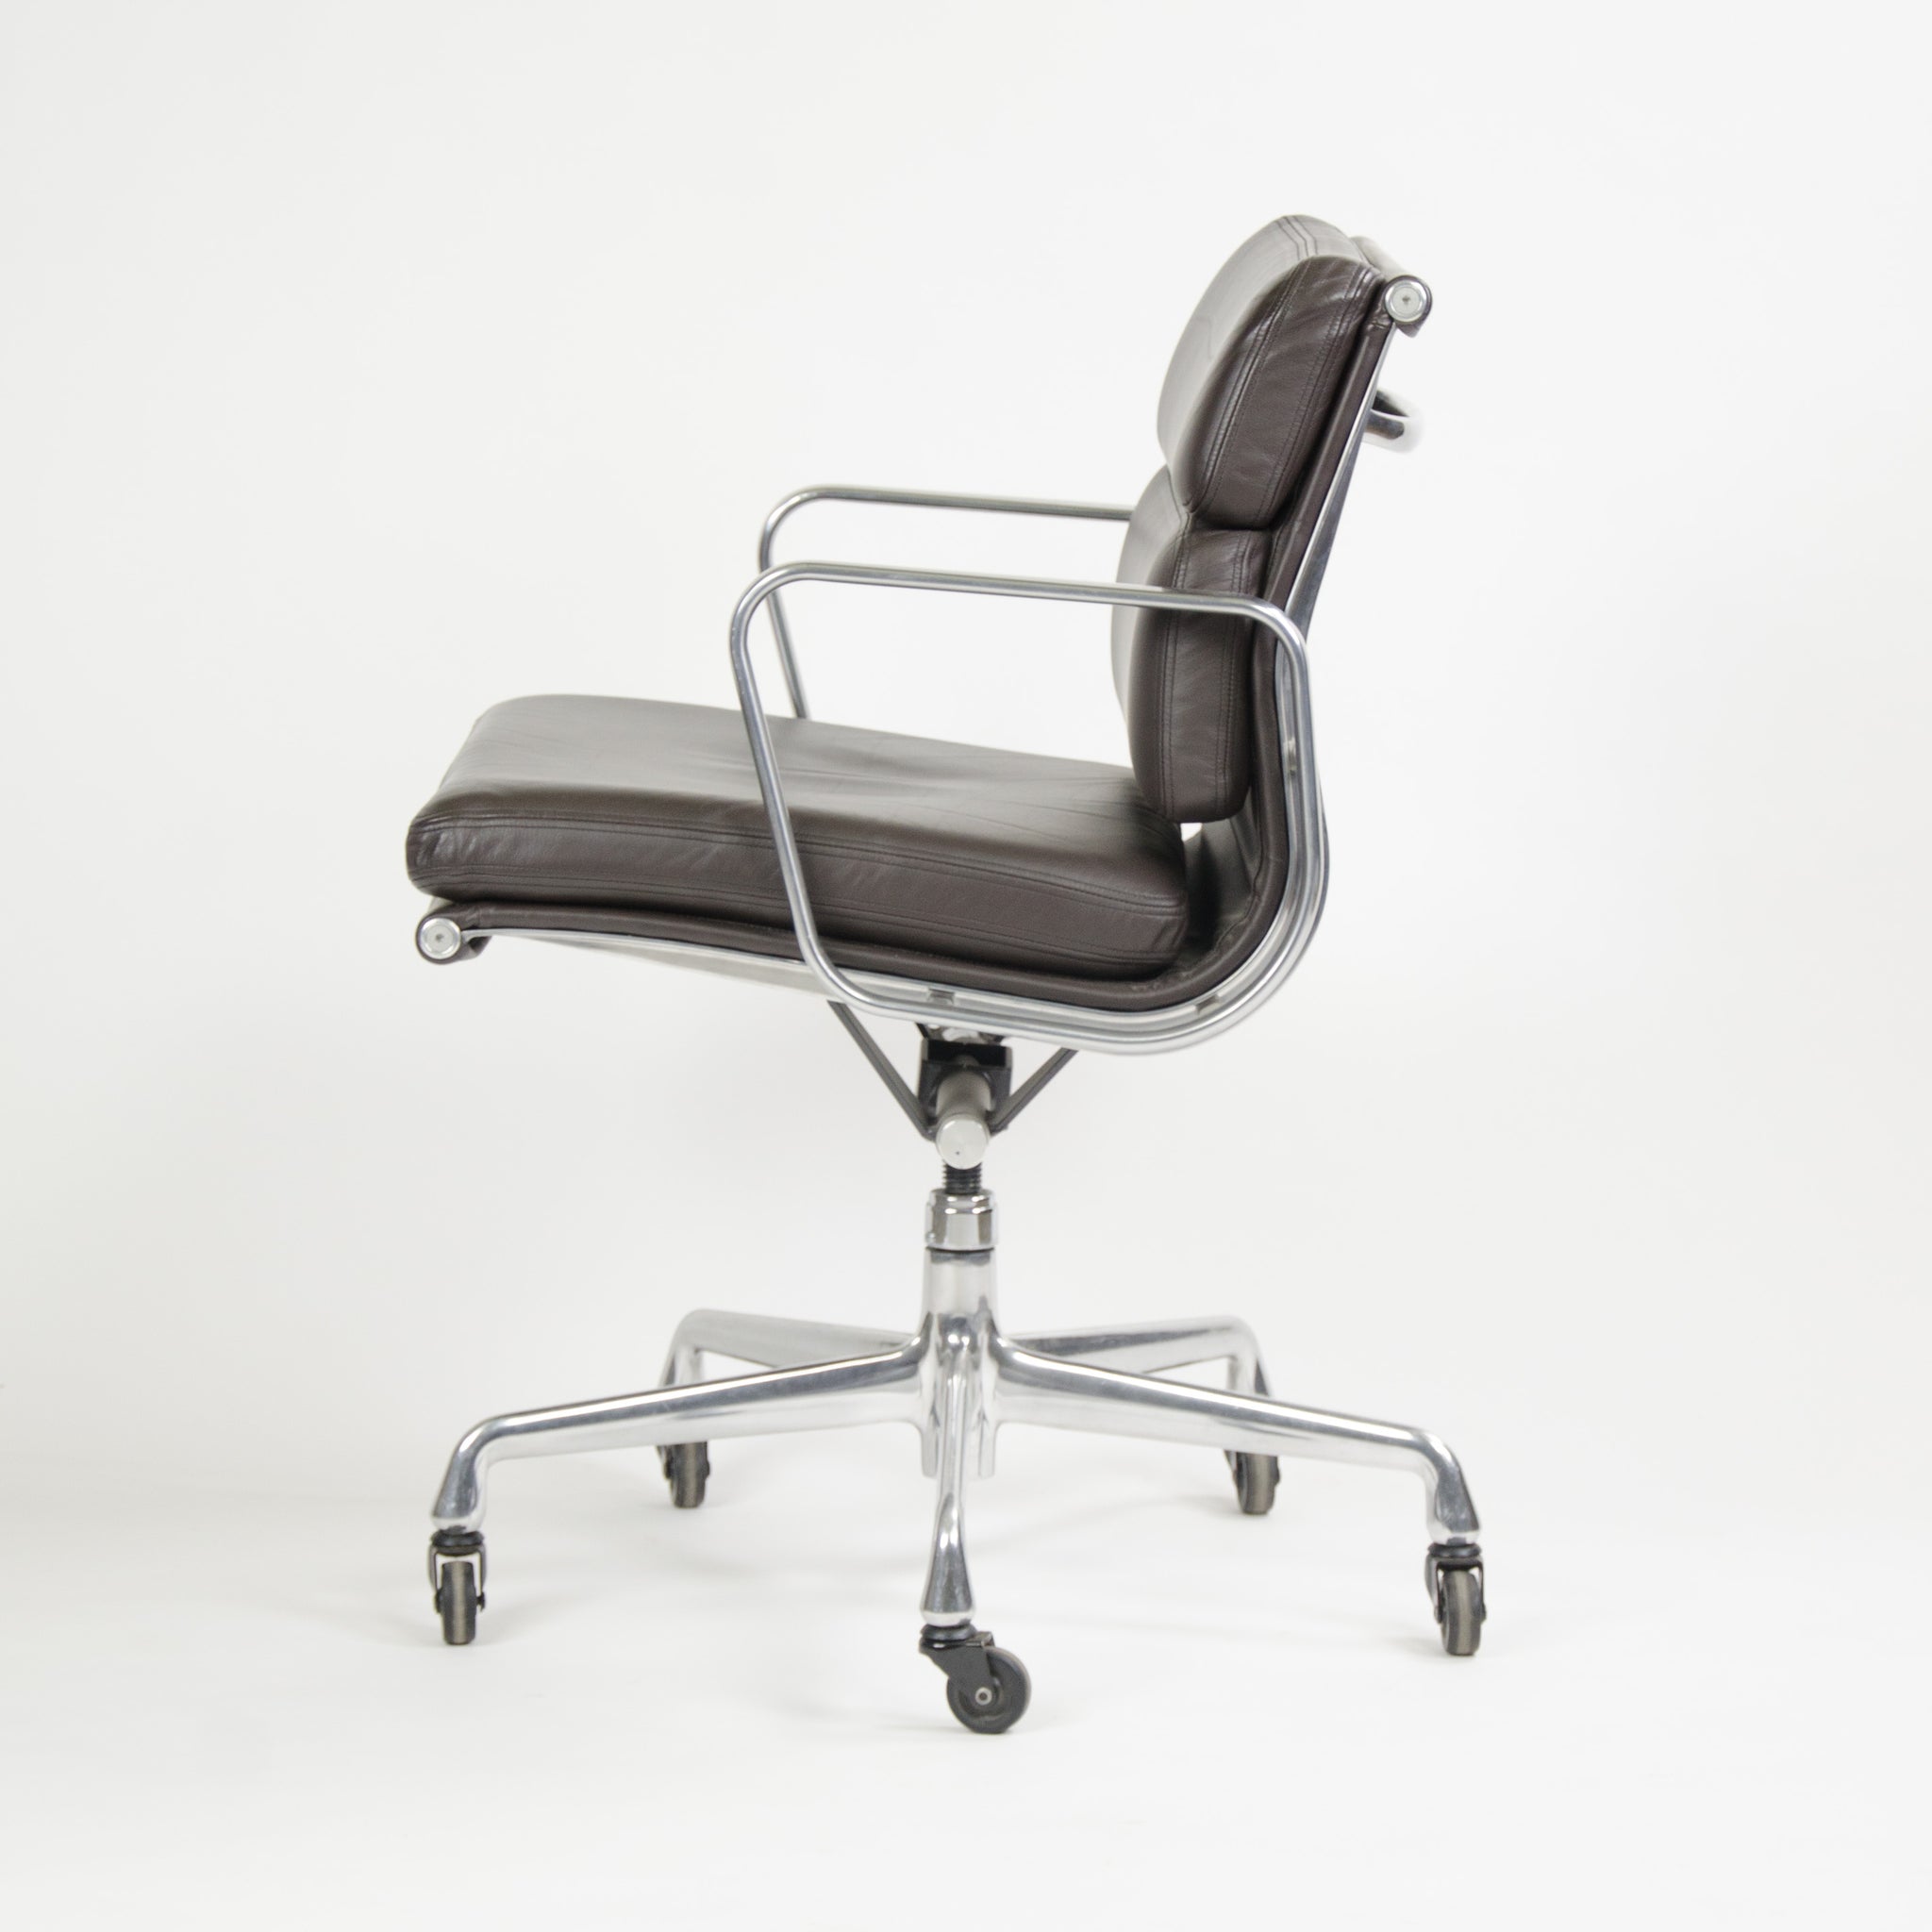 SOLD Herman Miller Eames Soft Pad Aluminum Group Chair Brown Leather 2006 1x Avail